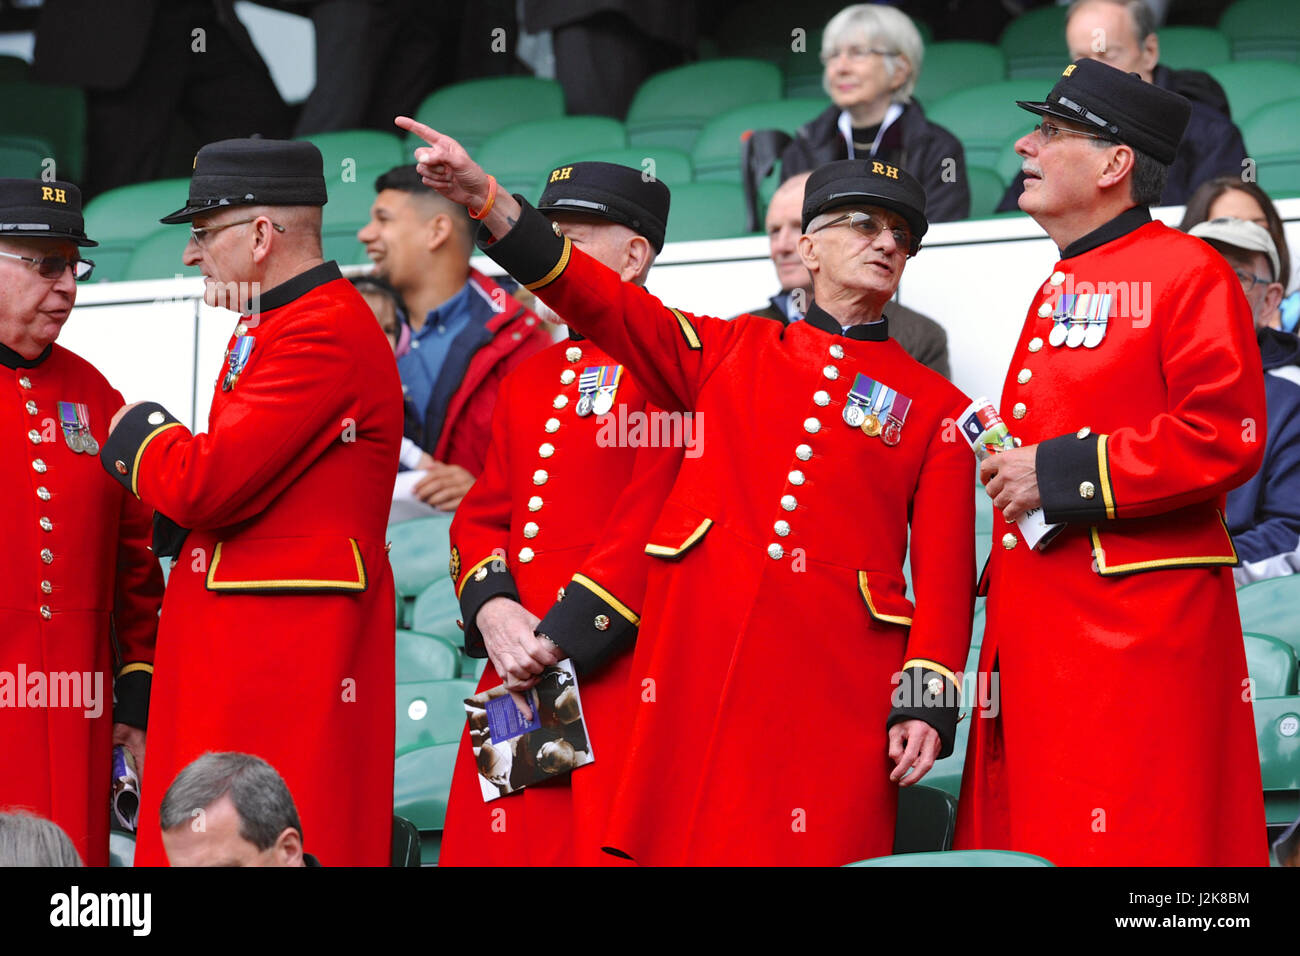 London, UK. 29th Apr, 2017. Chelsea Pensioners at the 100th annual Army Navy Rugby Match, Twickenham Stadium, London, UK.  The match is an annual rugby union match played between the senior XV teams of the Royal Navy and British Army and marks the culmination of the annual Inter-Services Competition. Credit: Michael Preston/Alamy Live News Stock Photo